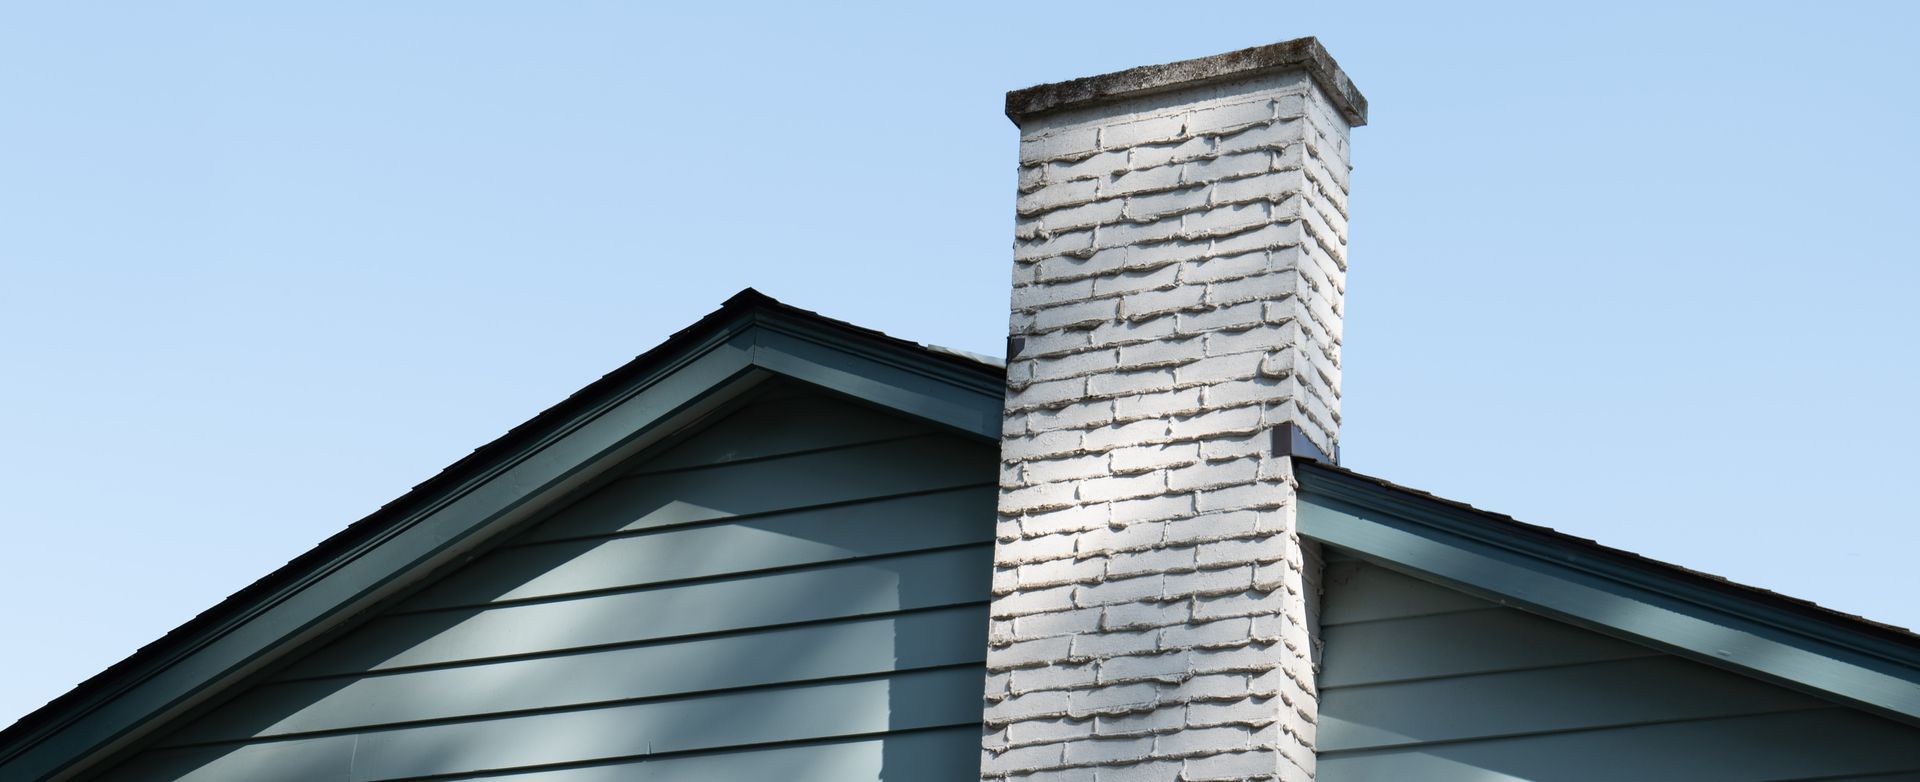 chimney on a house